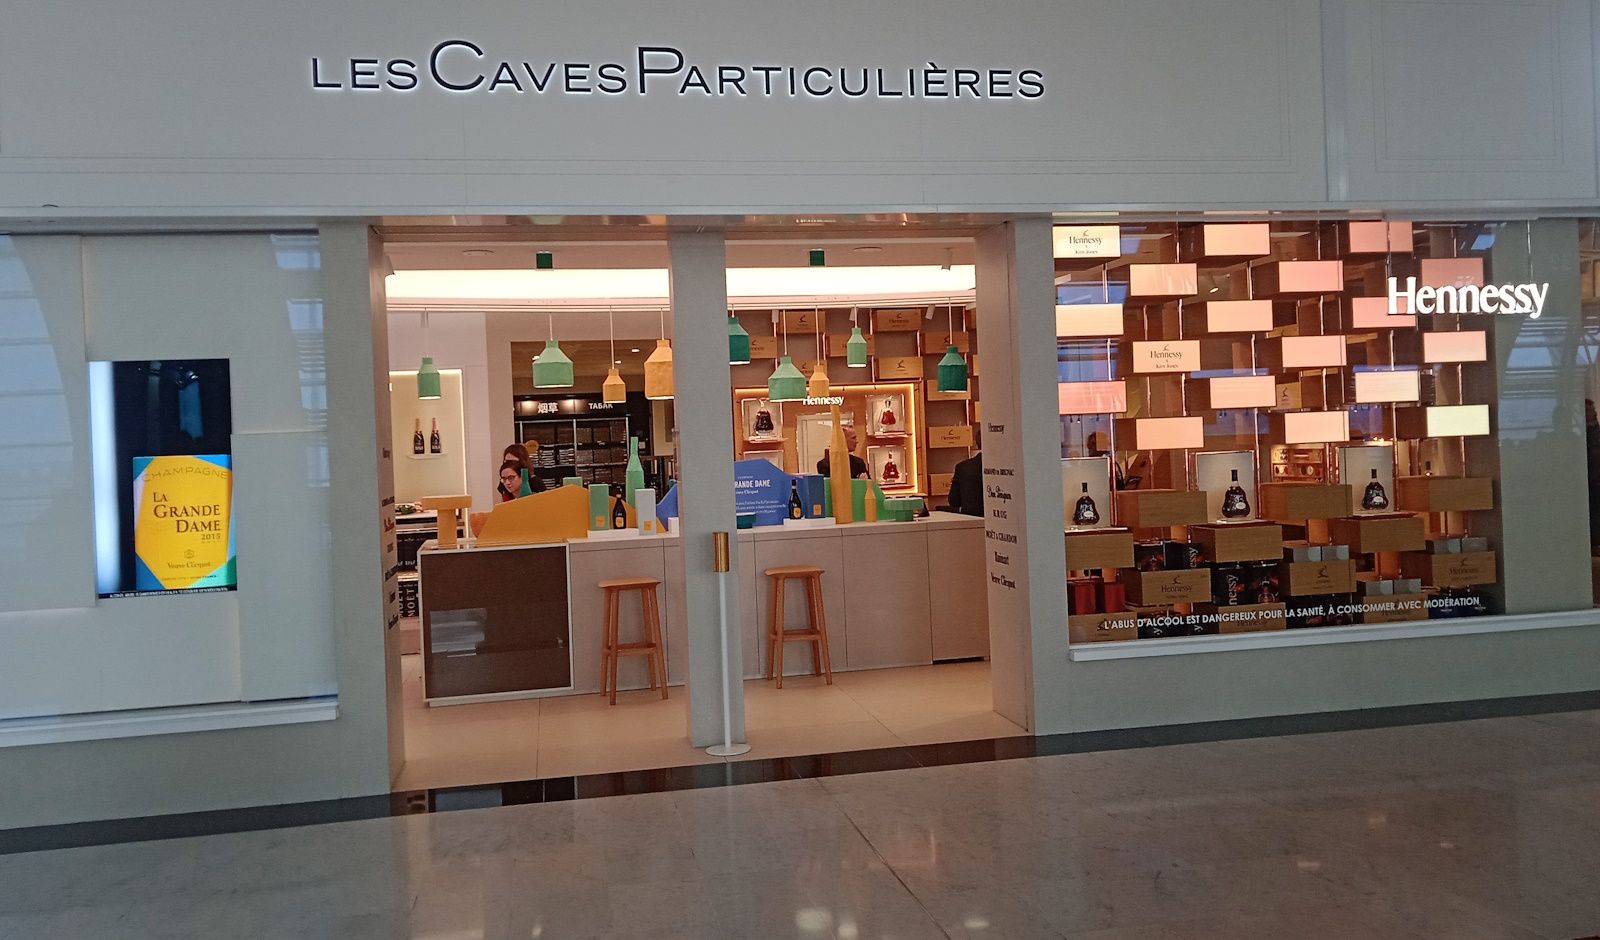 Local Guides Connect - Paris Airport StoreFront Photos - All Glam